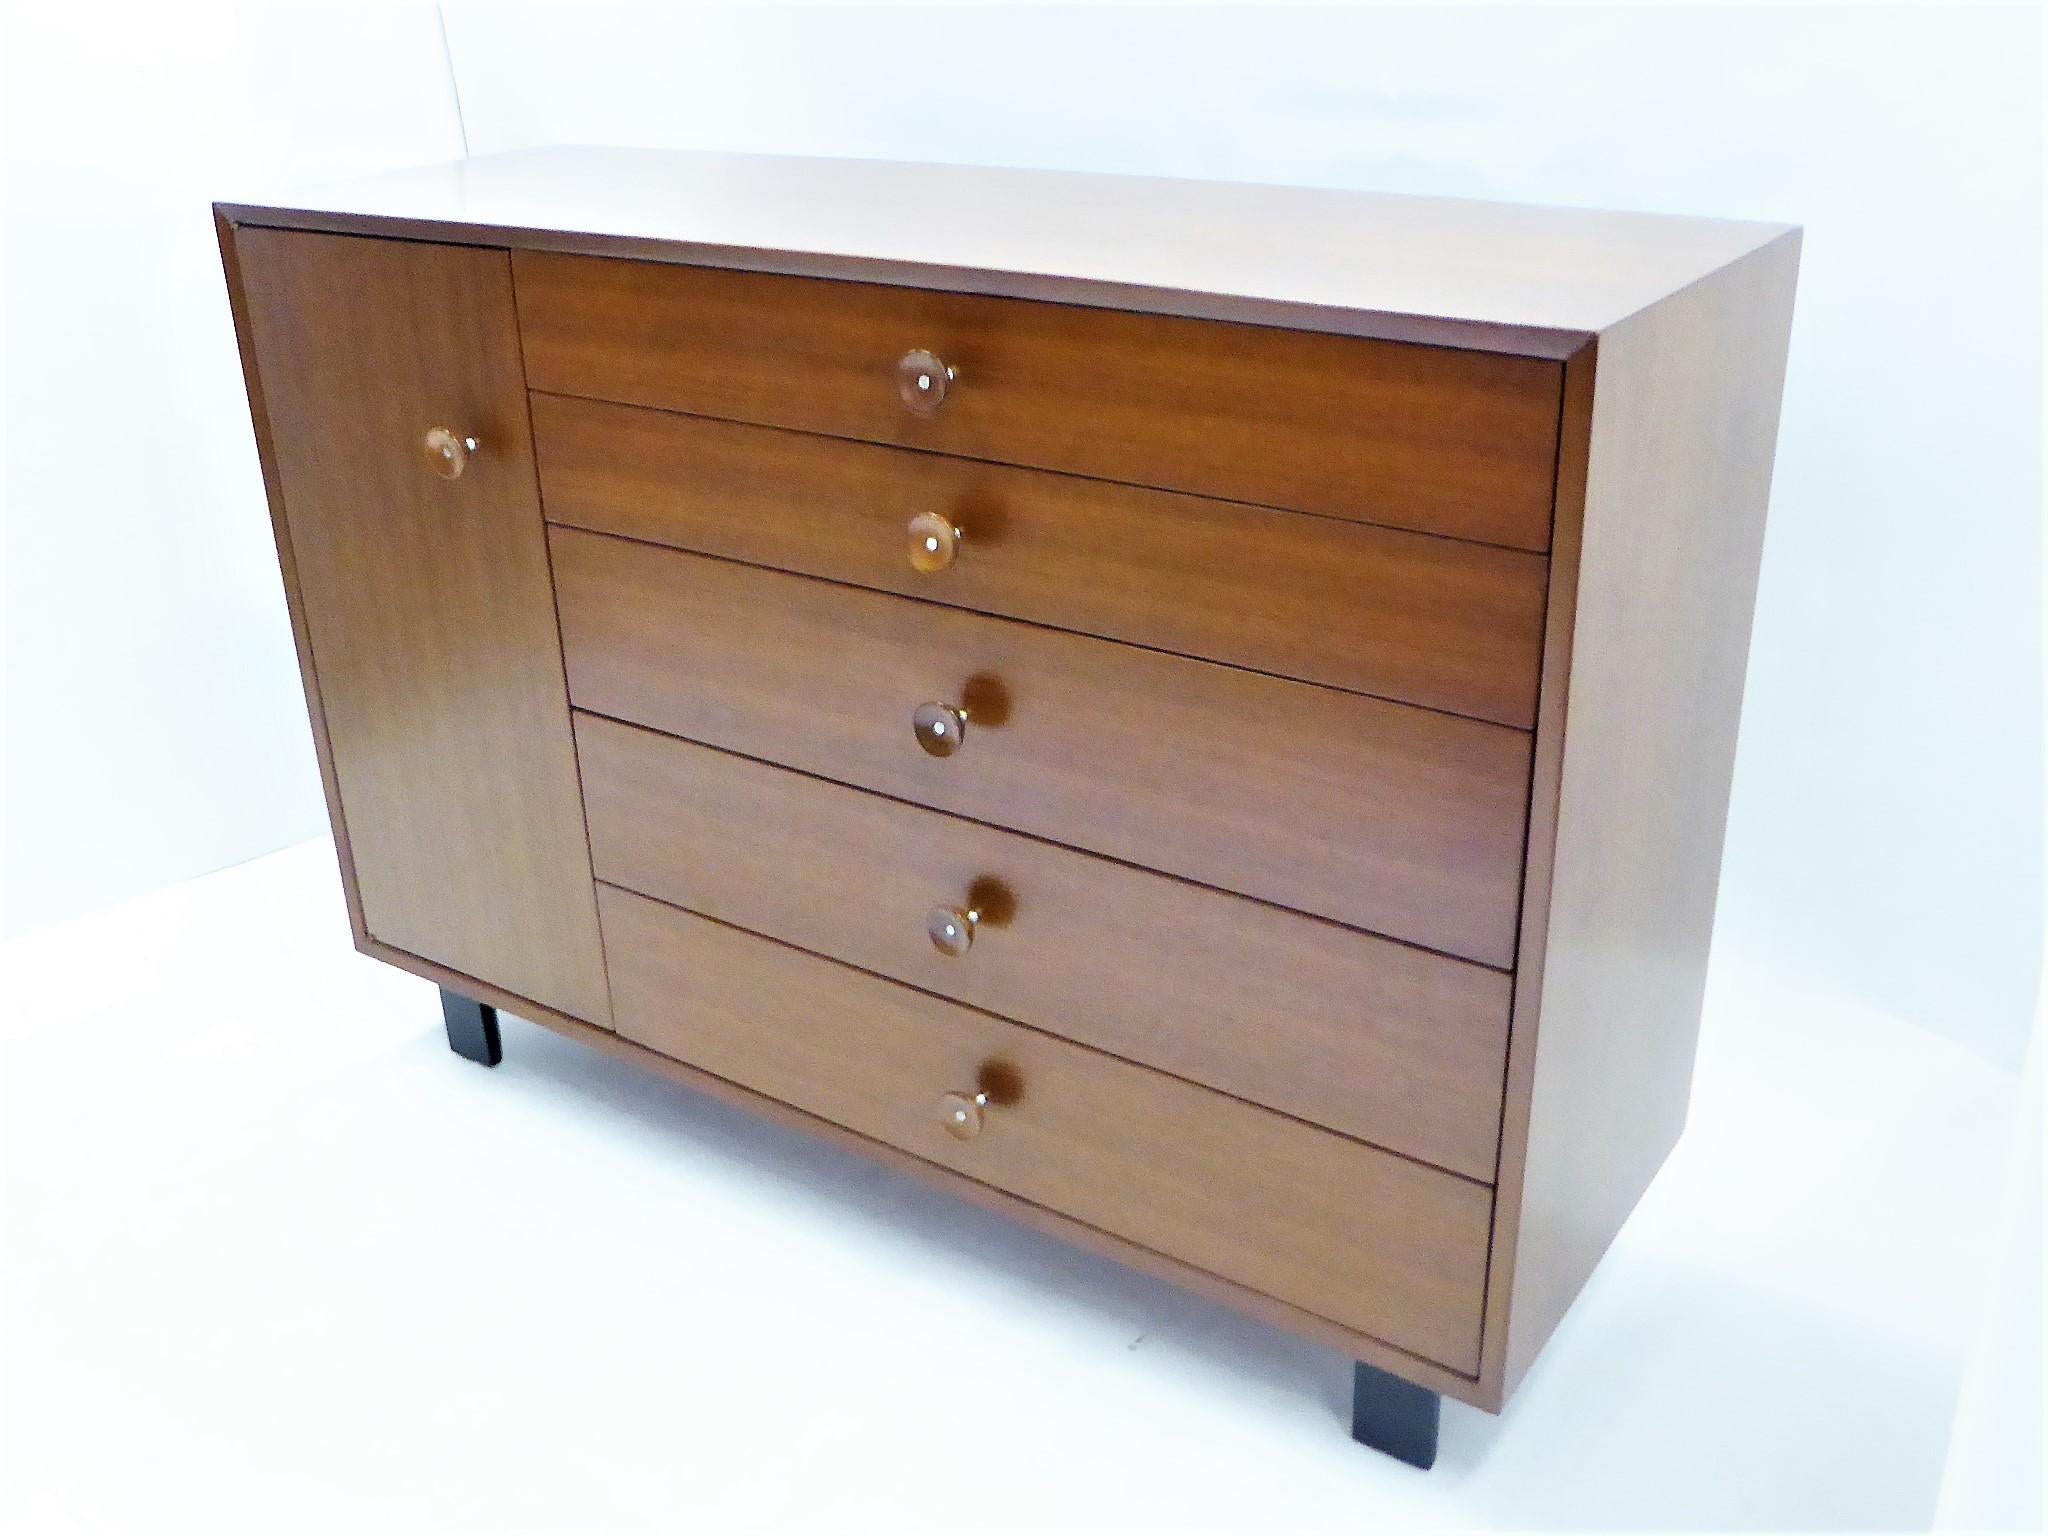 .George Nelson designed this walnut cabinet, dresser or credenza for Herman Miller as part of their basic cabinet series, Mid-Century Modern Classics. This one sometimes referred to as model 4935. The case sits on black shaped block feet. To the